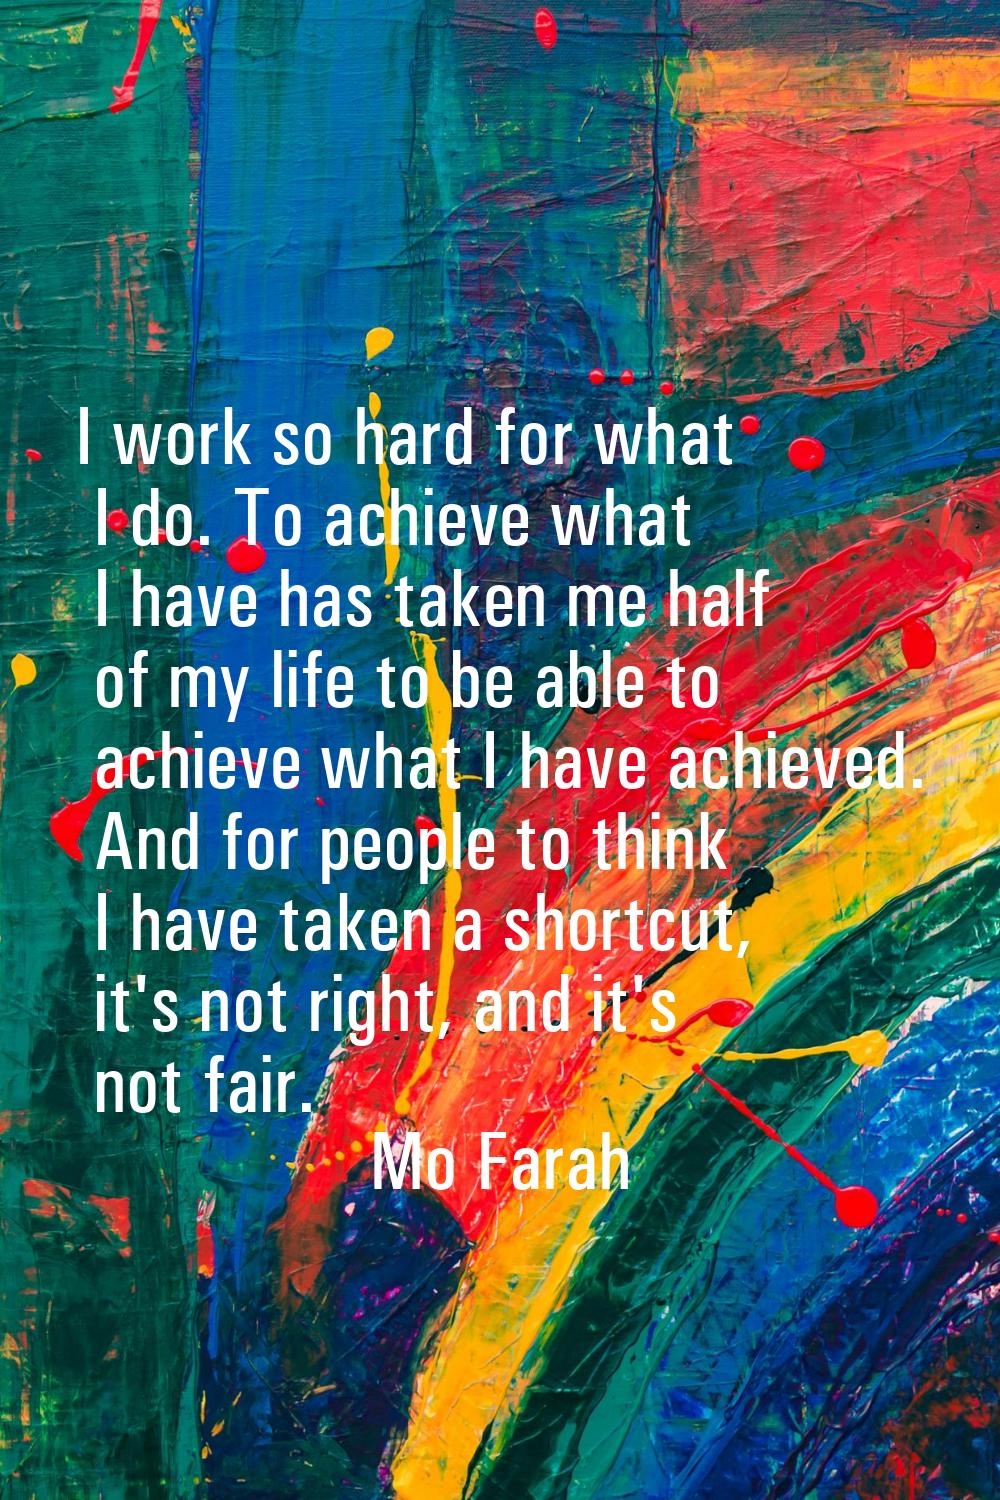 I work so hard for what I do. To achieve what I have has taken me half of my life to be able to ach